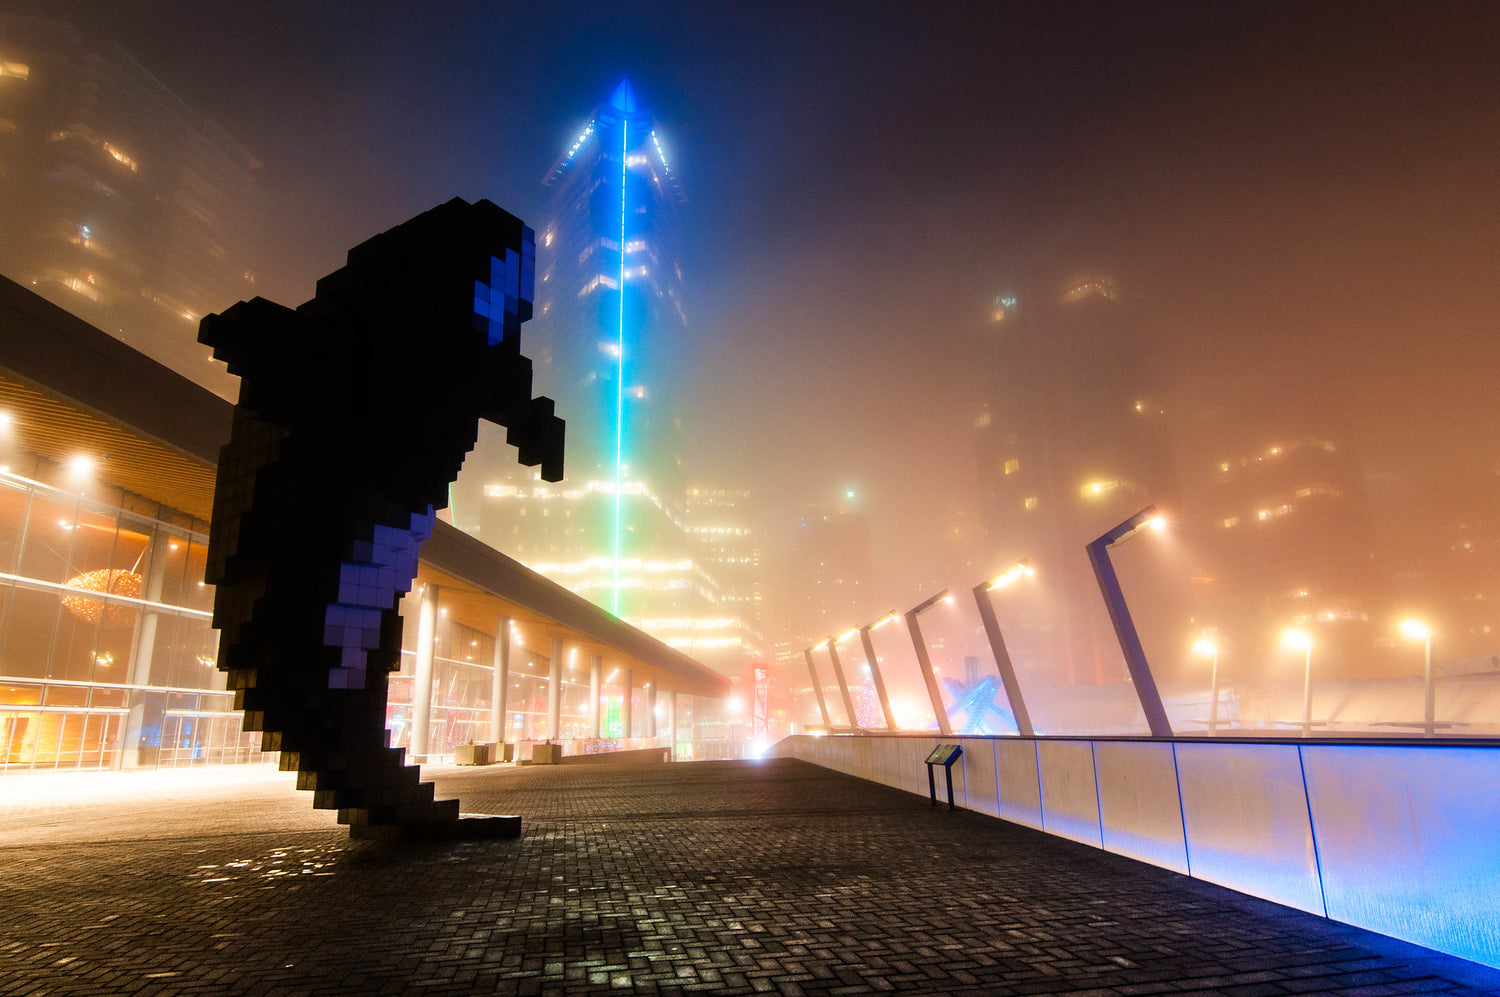 Orca Vancouver in the fog